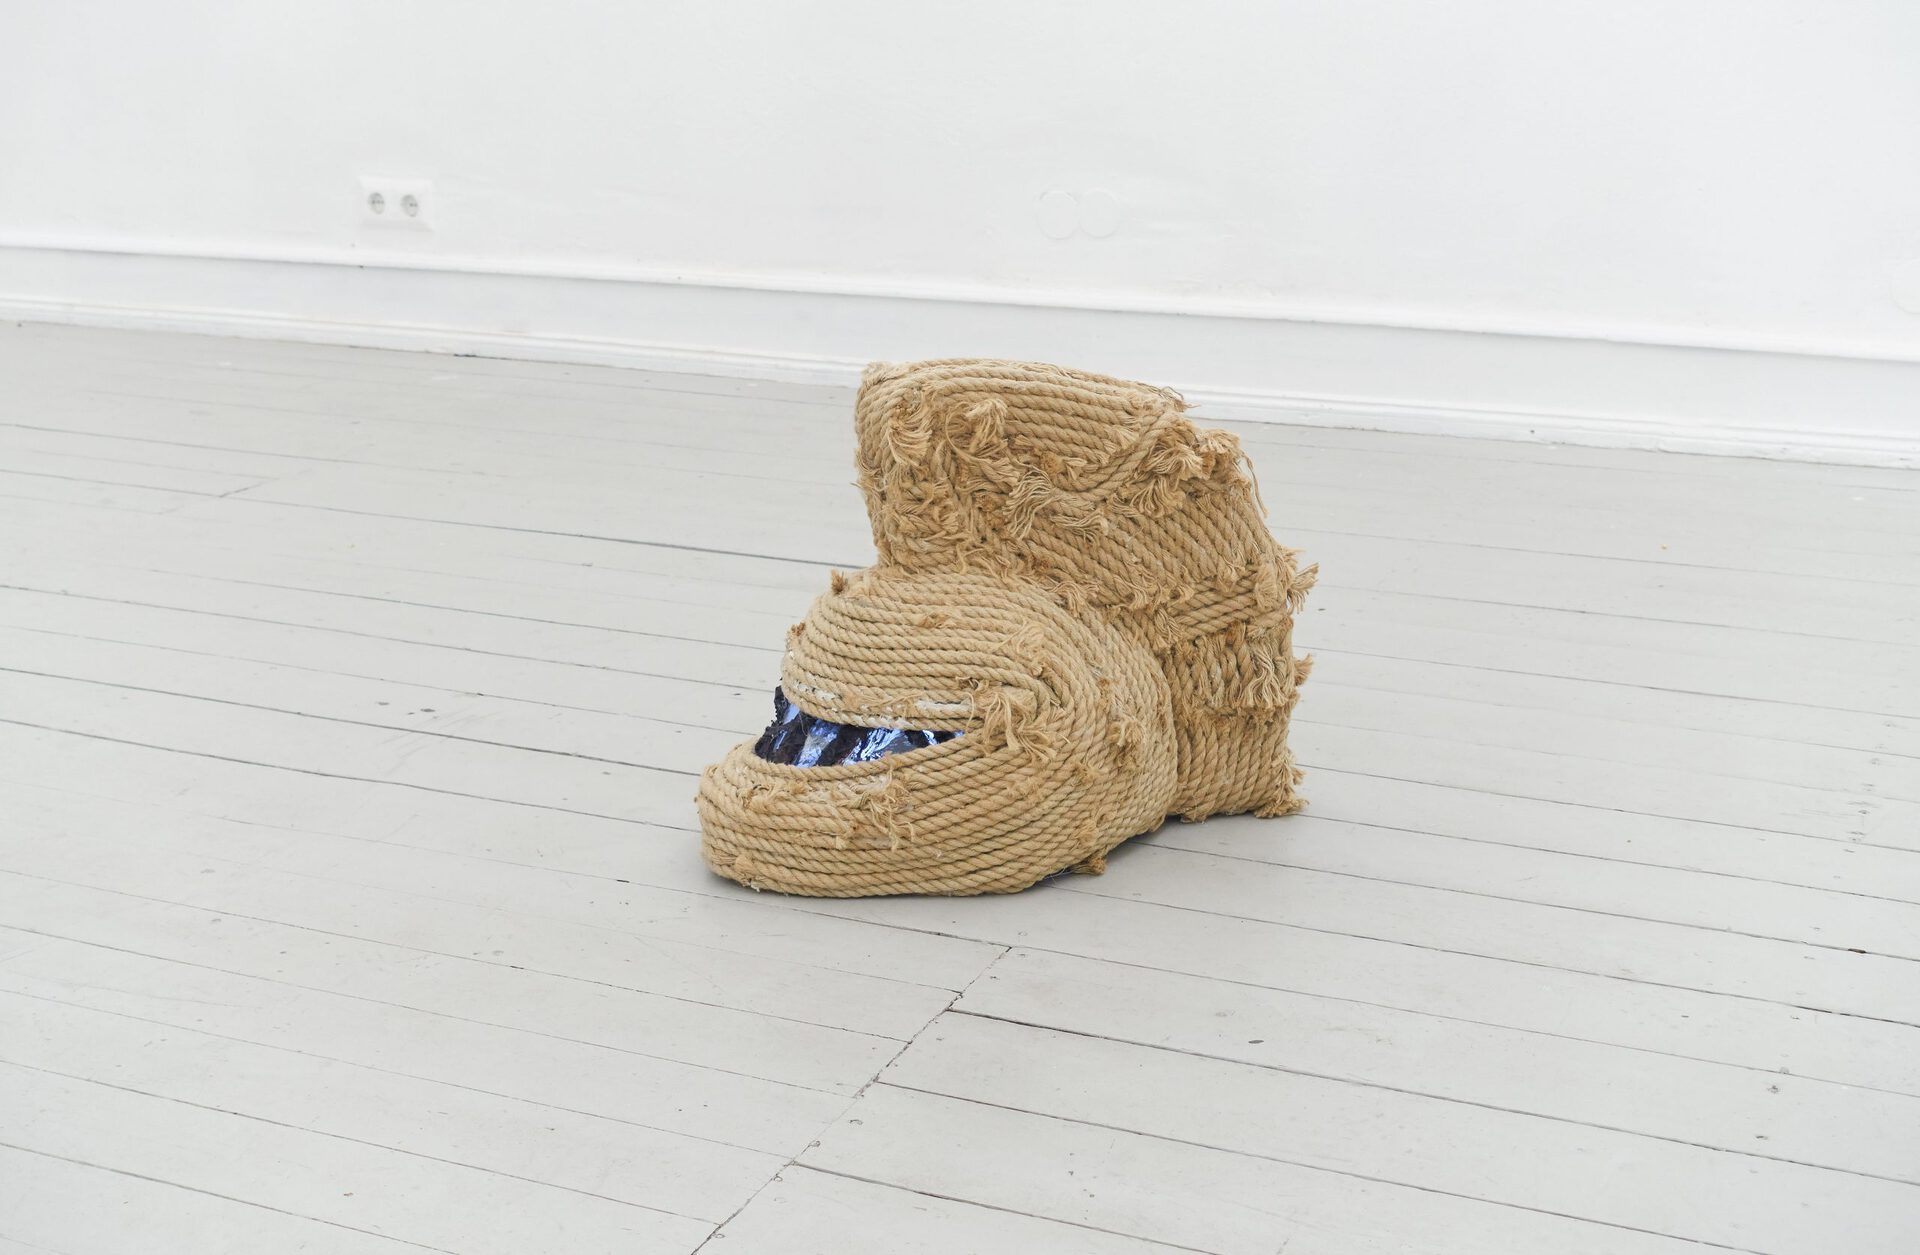 Bernhard Holaschke, Protection had to be given (Rope), 2019, Helmet and rope, 43 x 60 x 30 cm